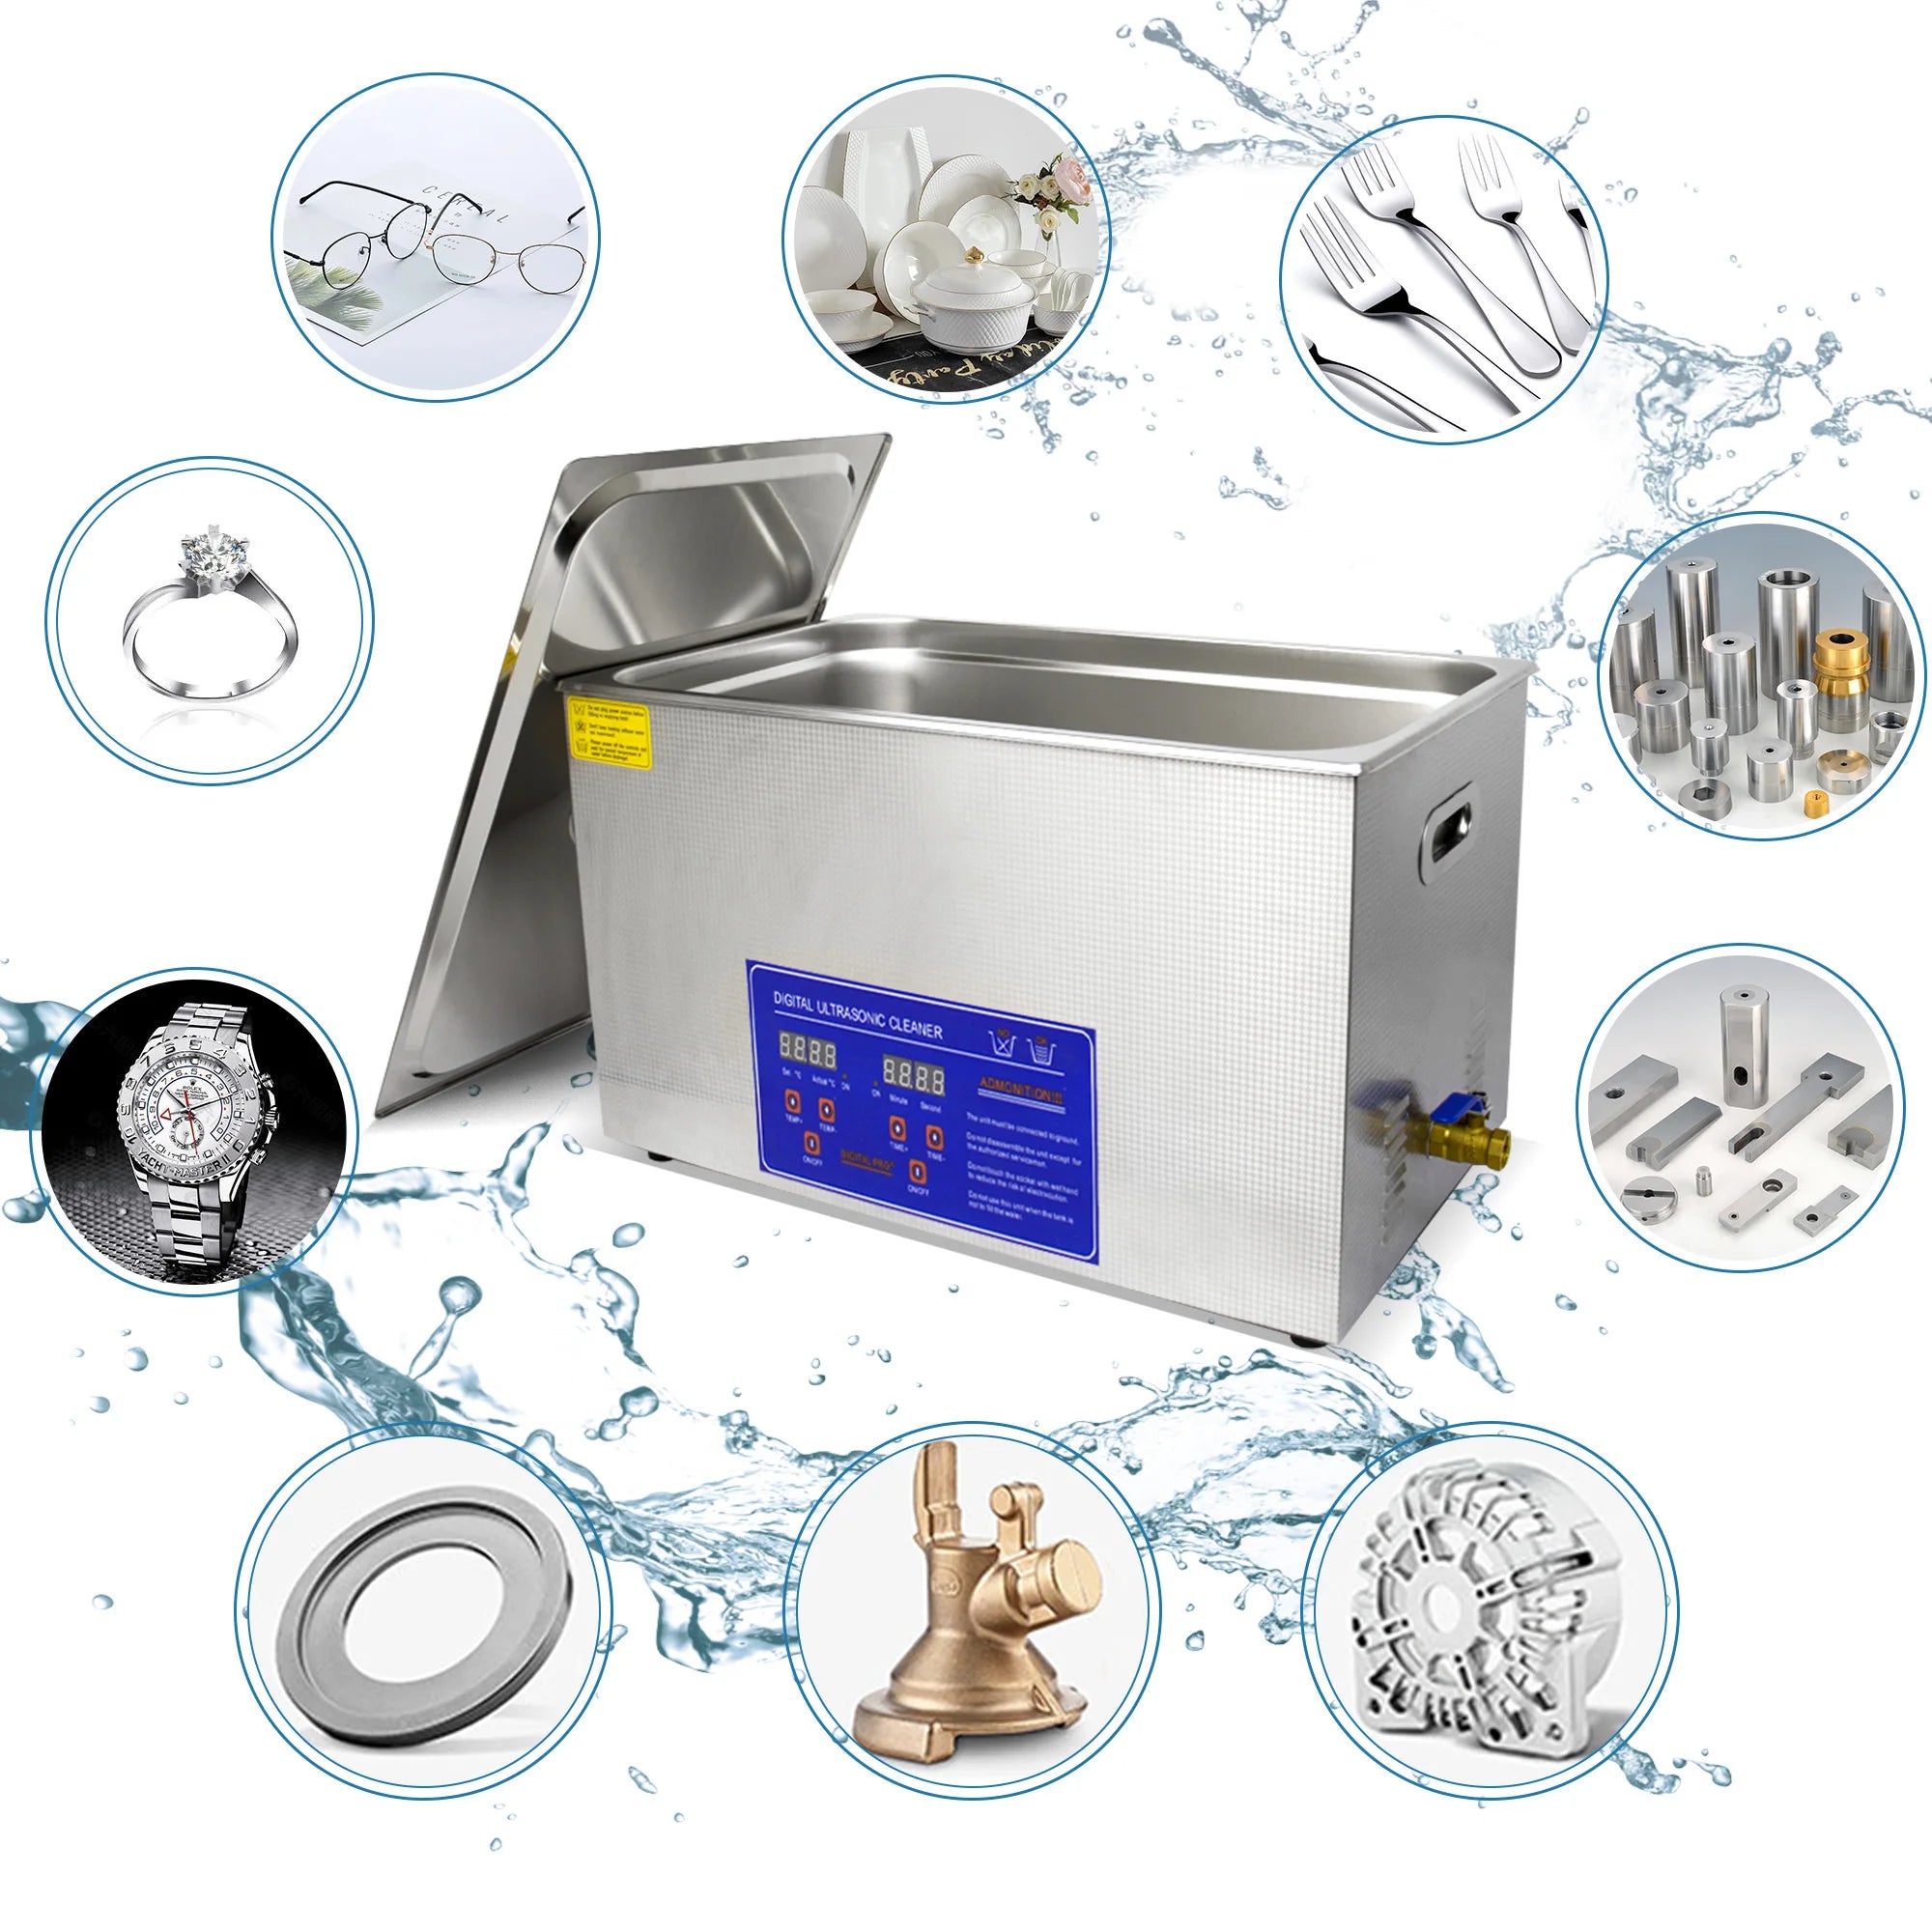 2-30L Ultrasonic Cleaner with Digital Timer Heater Stainless Steel Ultrasound Washing Machine 110V Ultra Sonic Home Appliances